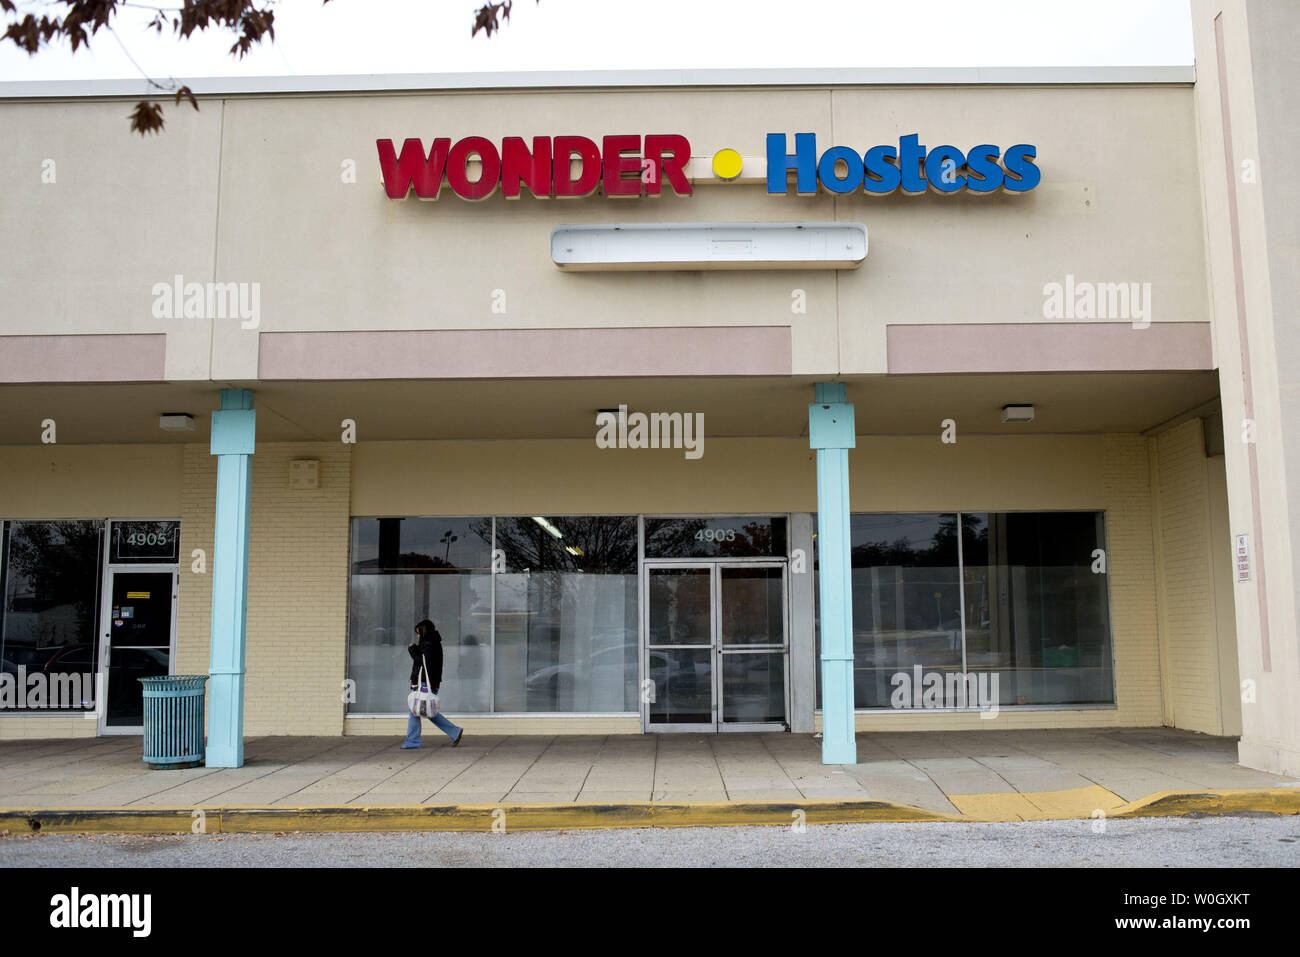 An out-of-business Wonder Bread Hostess outlet store is seen in Camp Spring, Maryland on November 20, 2012. Hostess Brands, the maker of Twinkies, Ding Dongs, Wonder Bread and other baked goods, announced on November 9 it will shut down after it's Chapter 11 bankruptcy restructuring failed in the wake of a workers strike brought on by an imposed contract that would cut workers' wages by 8 percent.  UPI/Kevin Dietsch Stock Photo